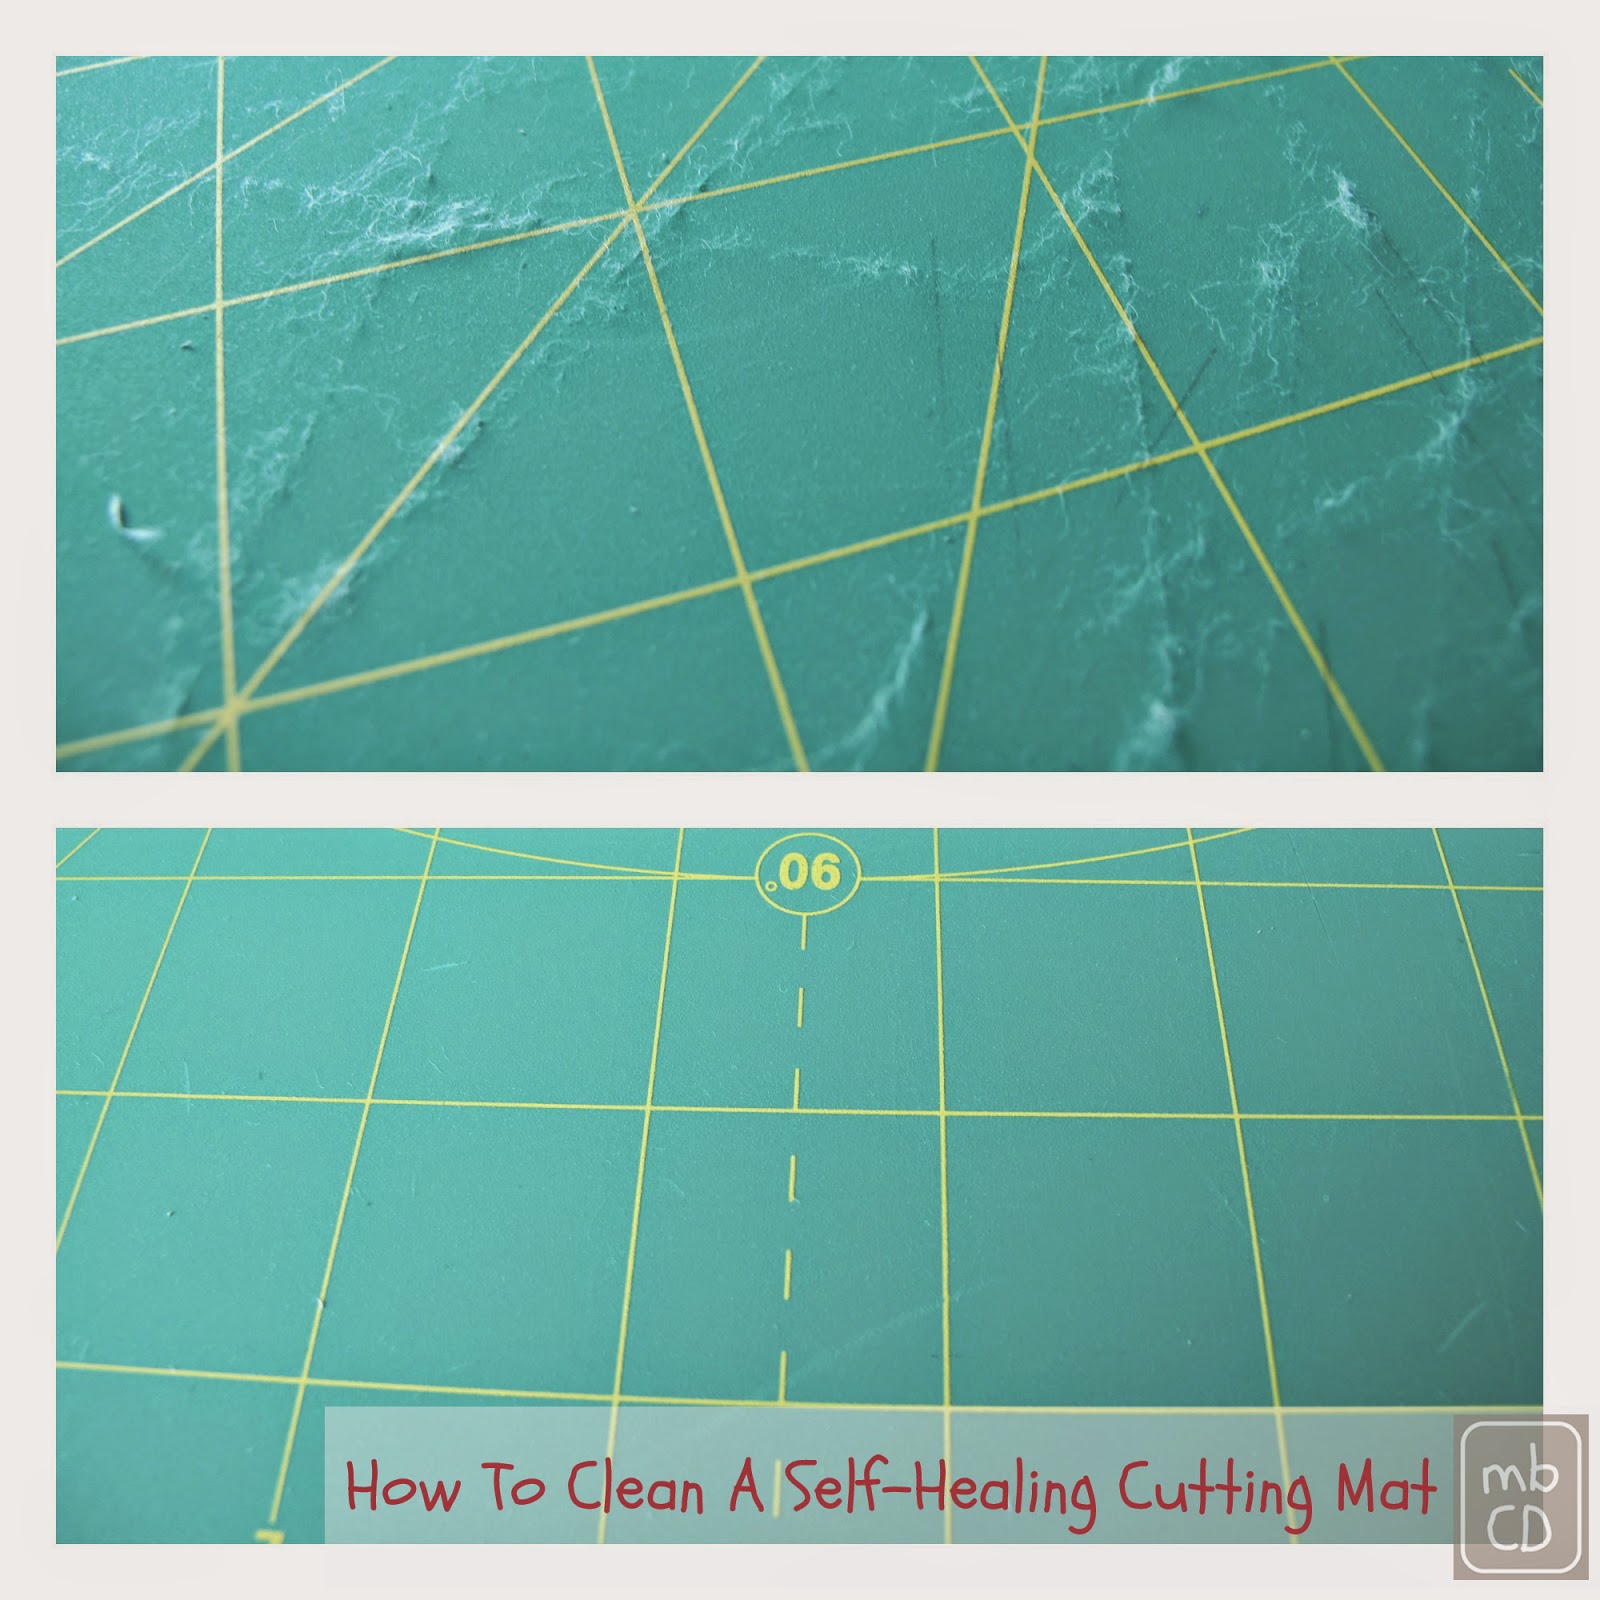 Chris Dodsley @mbCD: How To Clean And Care For A Self-Healing Cutting Mat